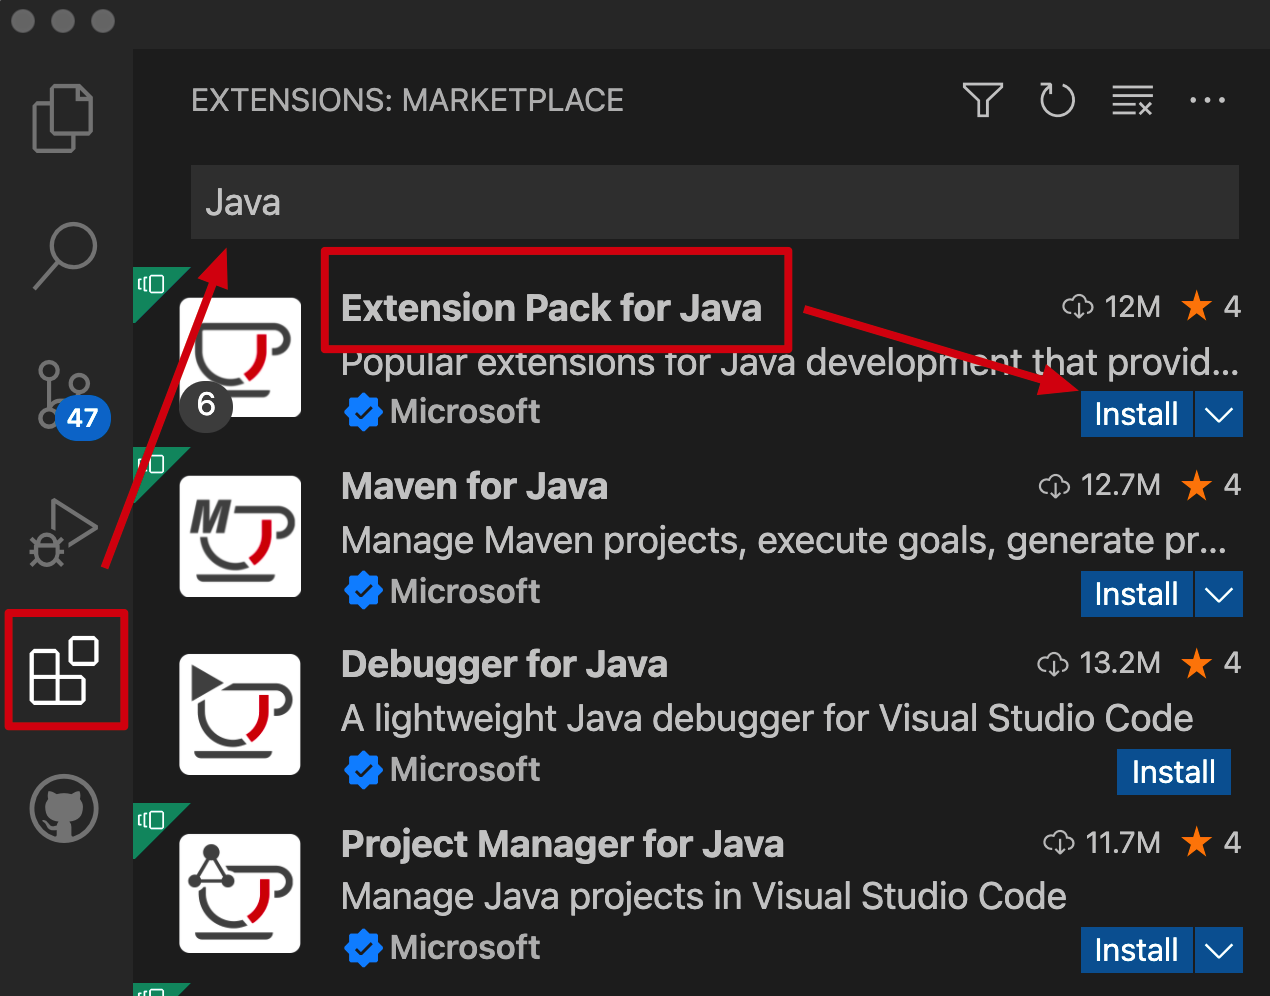 install-extension-pack-for-java.png